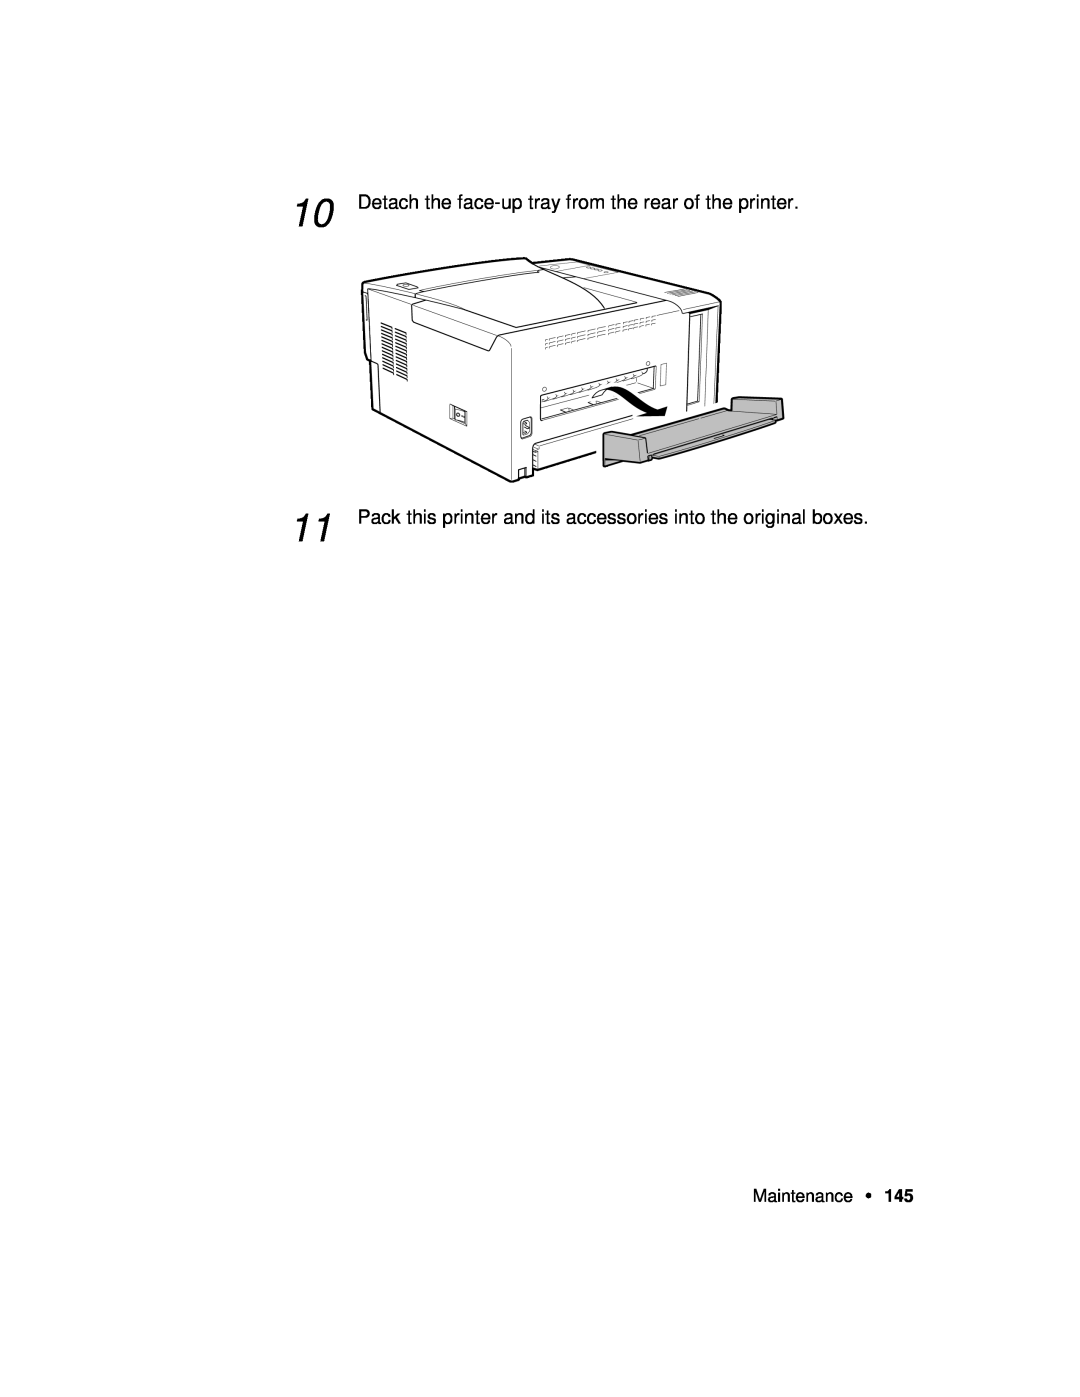 Xerox P12 manual Detach the face-up tray from the rear of the printer, Maintenance 